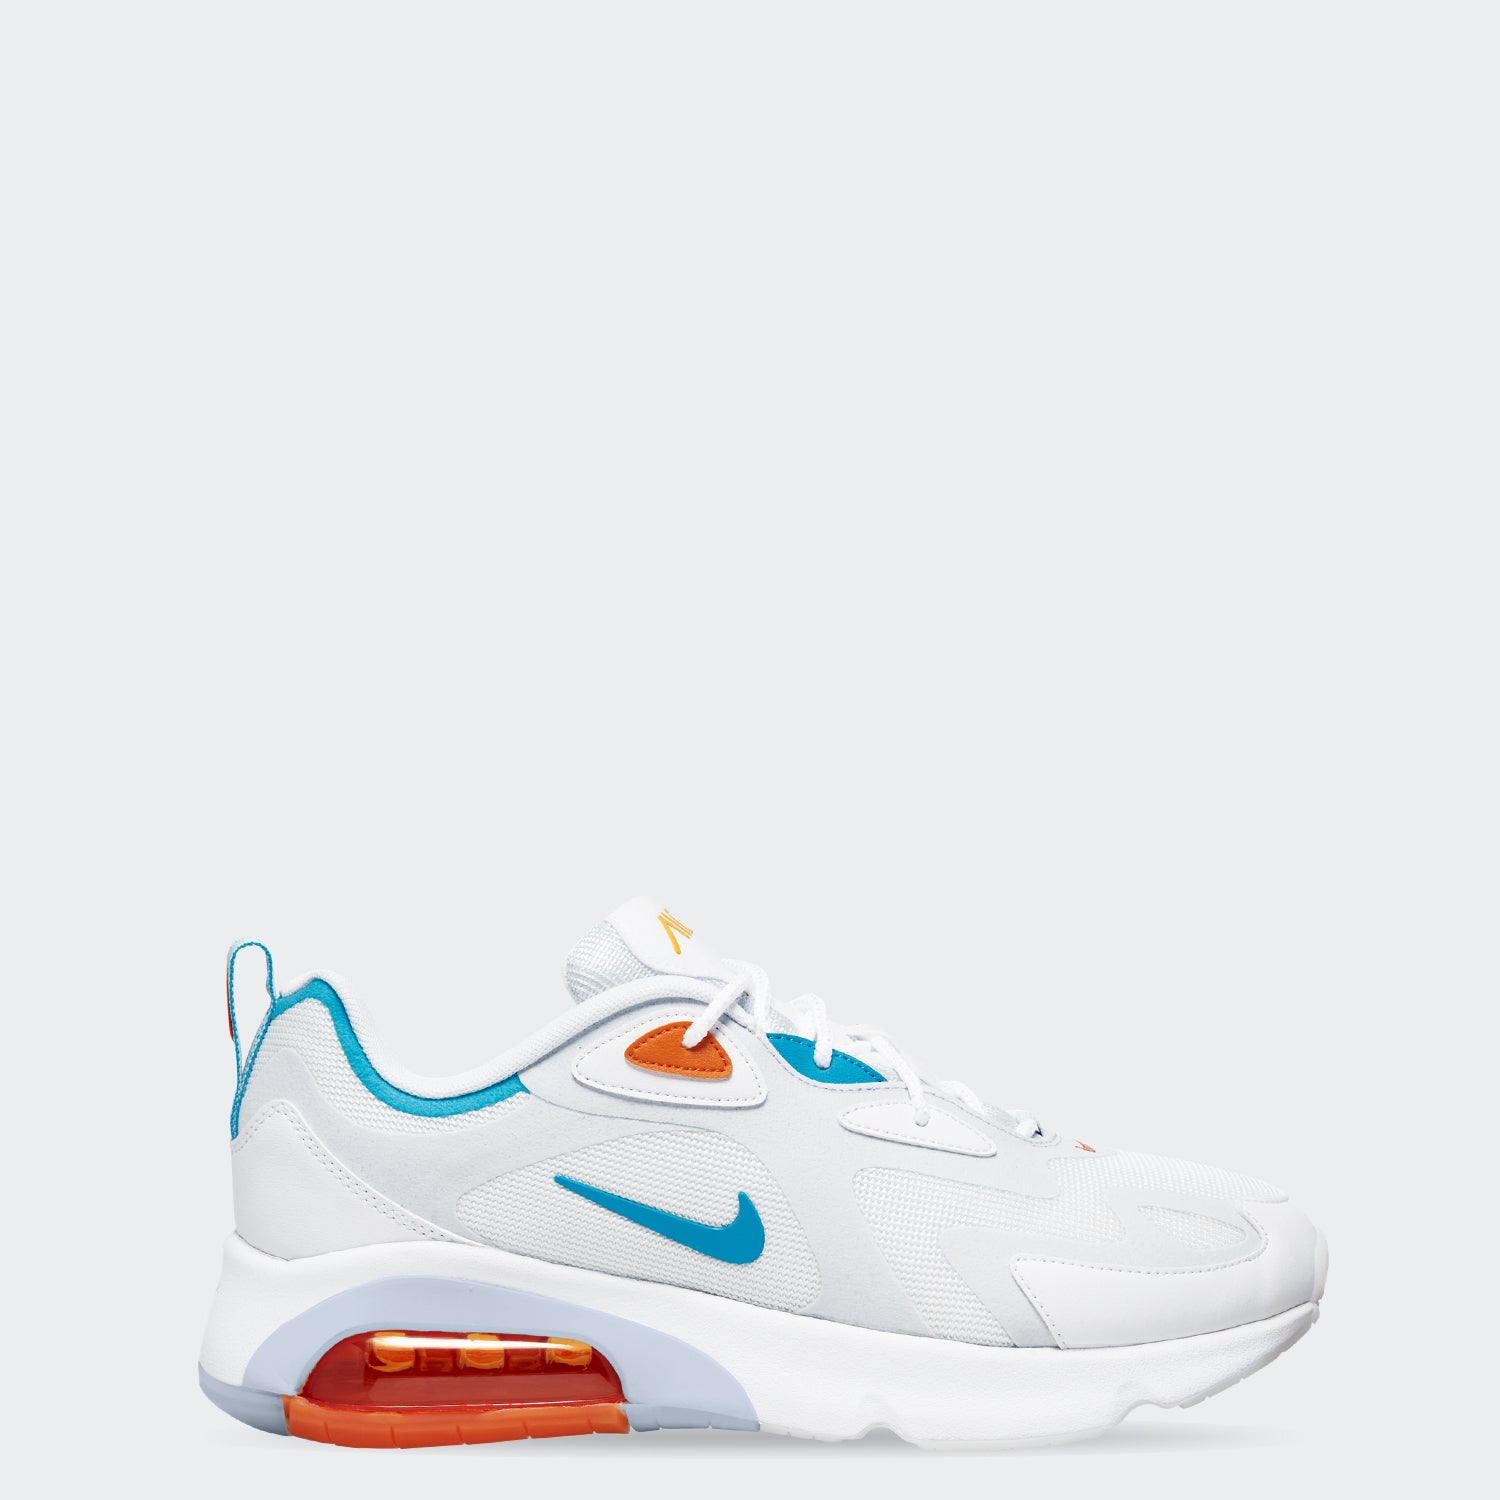 white nike shoes with blue bottom